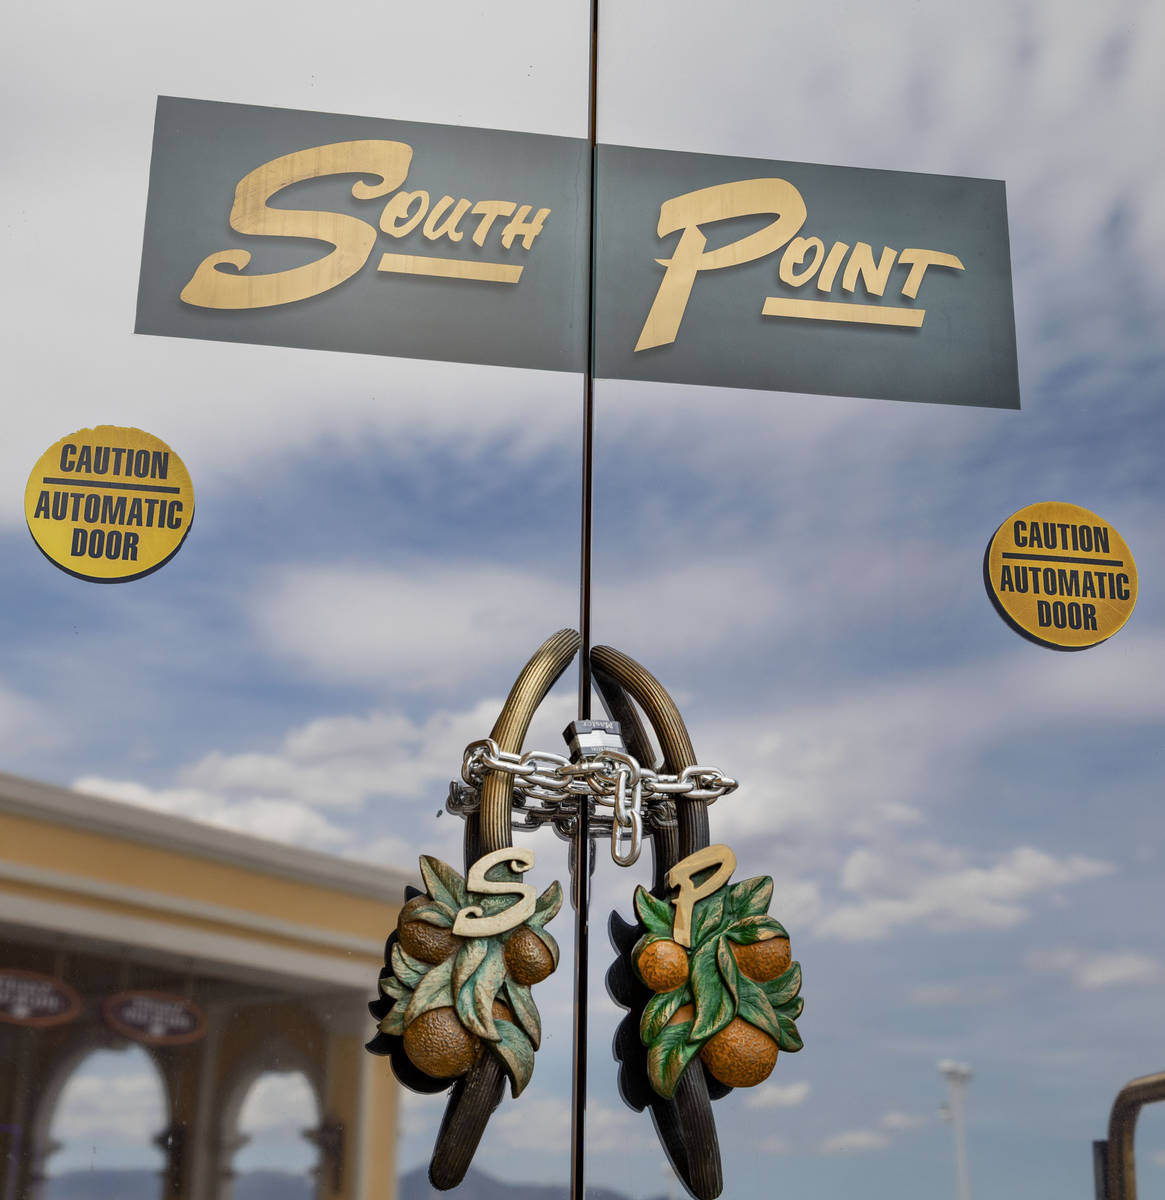 South Point Las Vegas will furlough employees